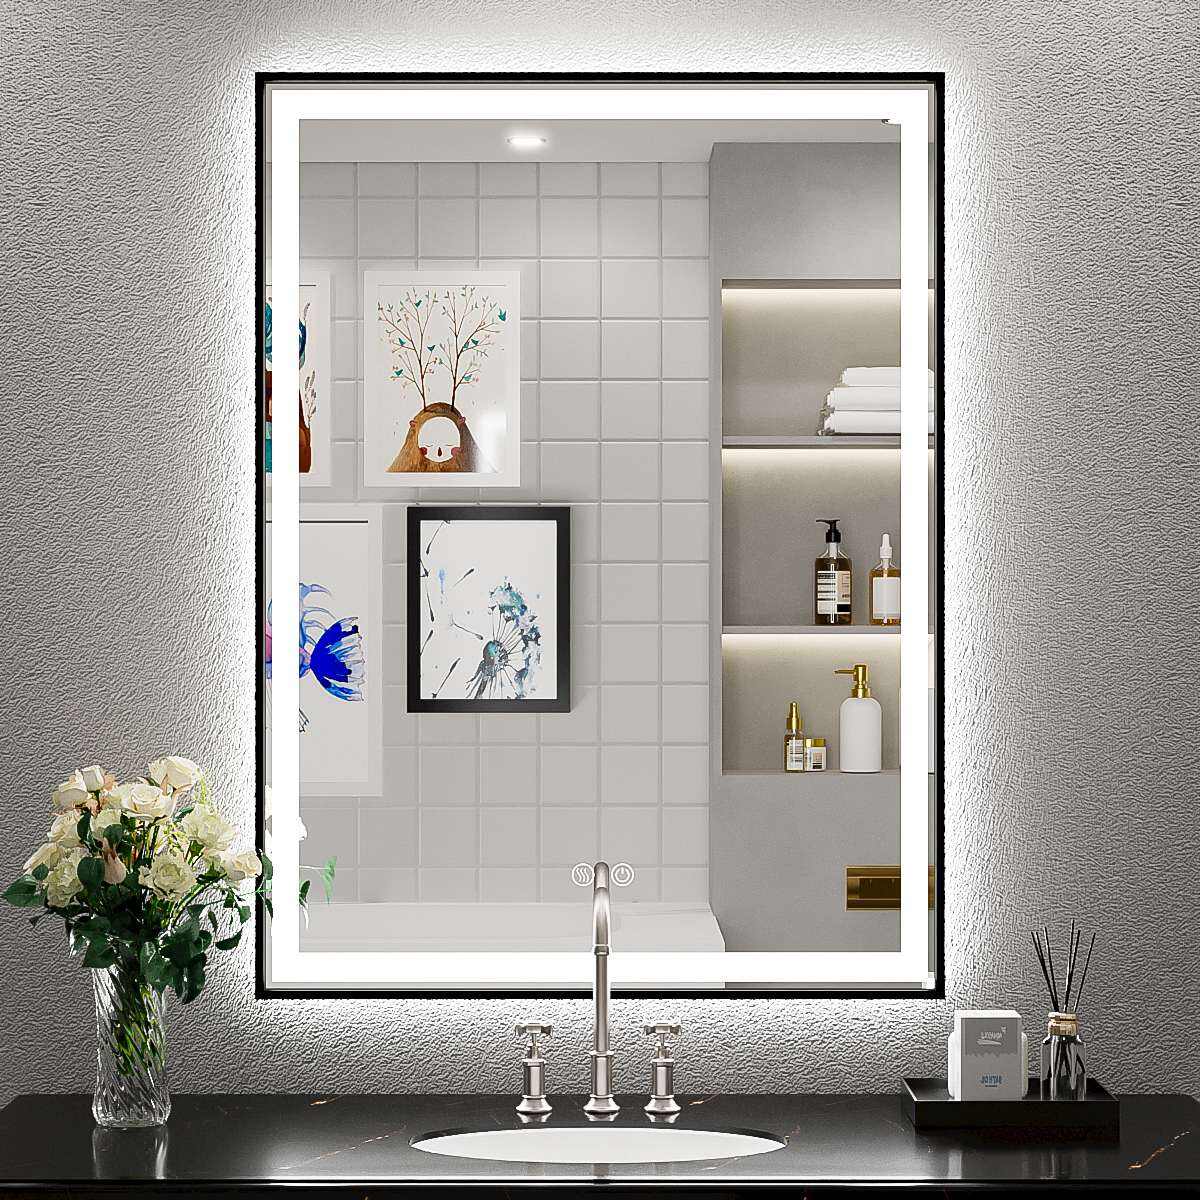 JJGullit bathroom mirror supplier Bathroom LED Mirror, 24x32 Inch Frontlit & Backlit Mirror, Bathroom Vanity Mirror with Lights, Stepless Dimmable, French Cleats Wall Mount Anti-Fog Lighted Mirror